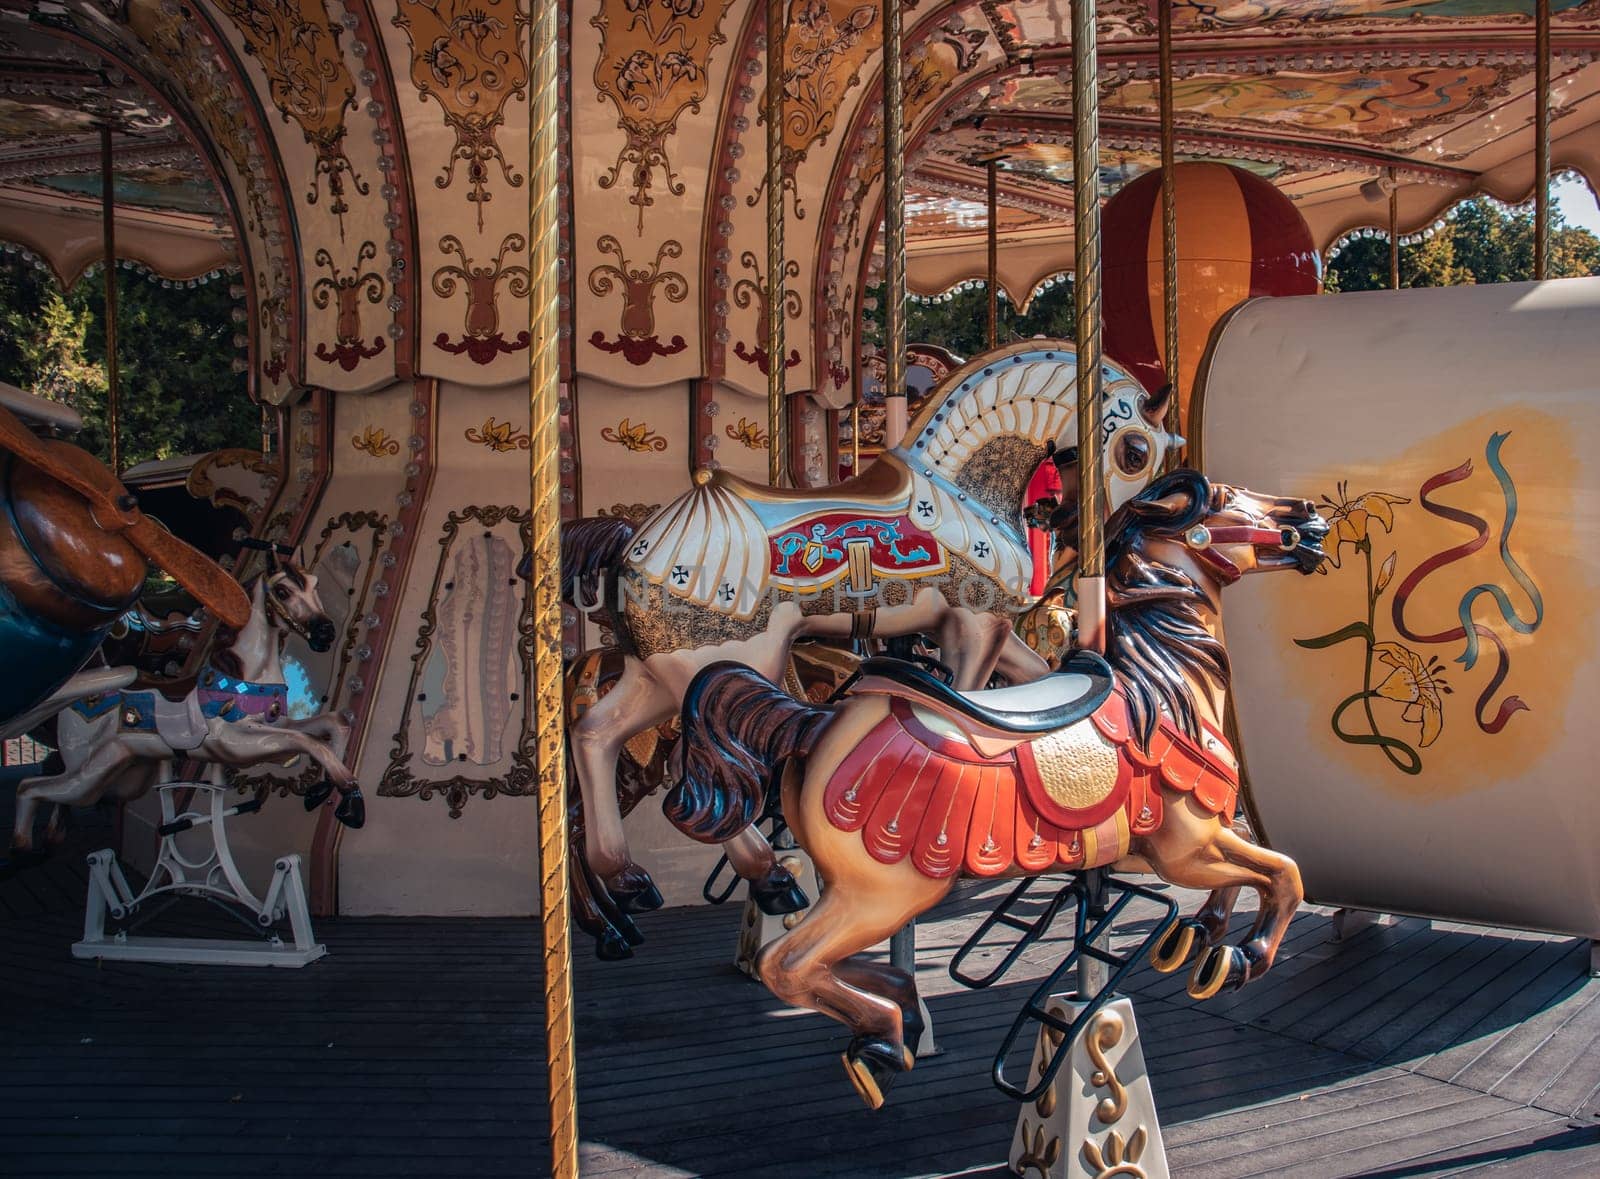 Vintage fair horse carousel in amusement park concept photo by _Nataly_Nati_